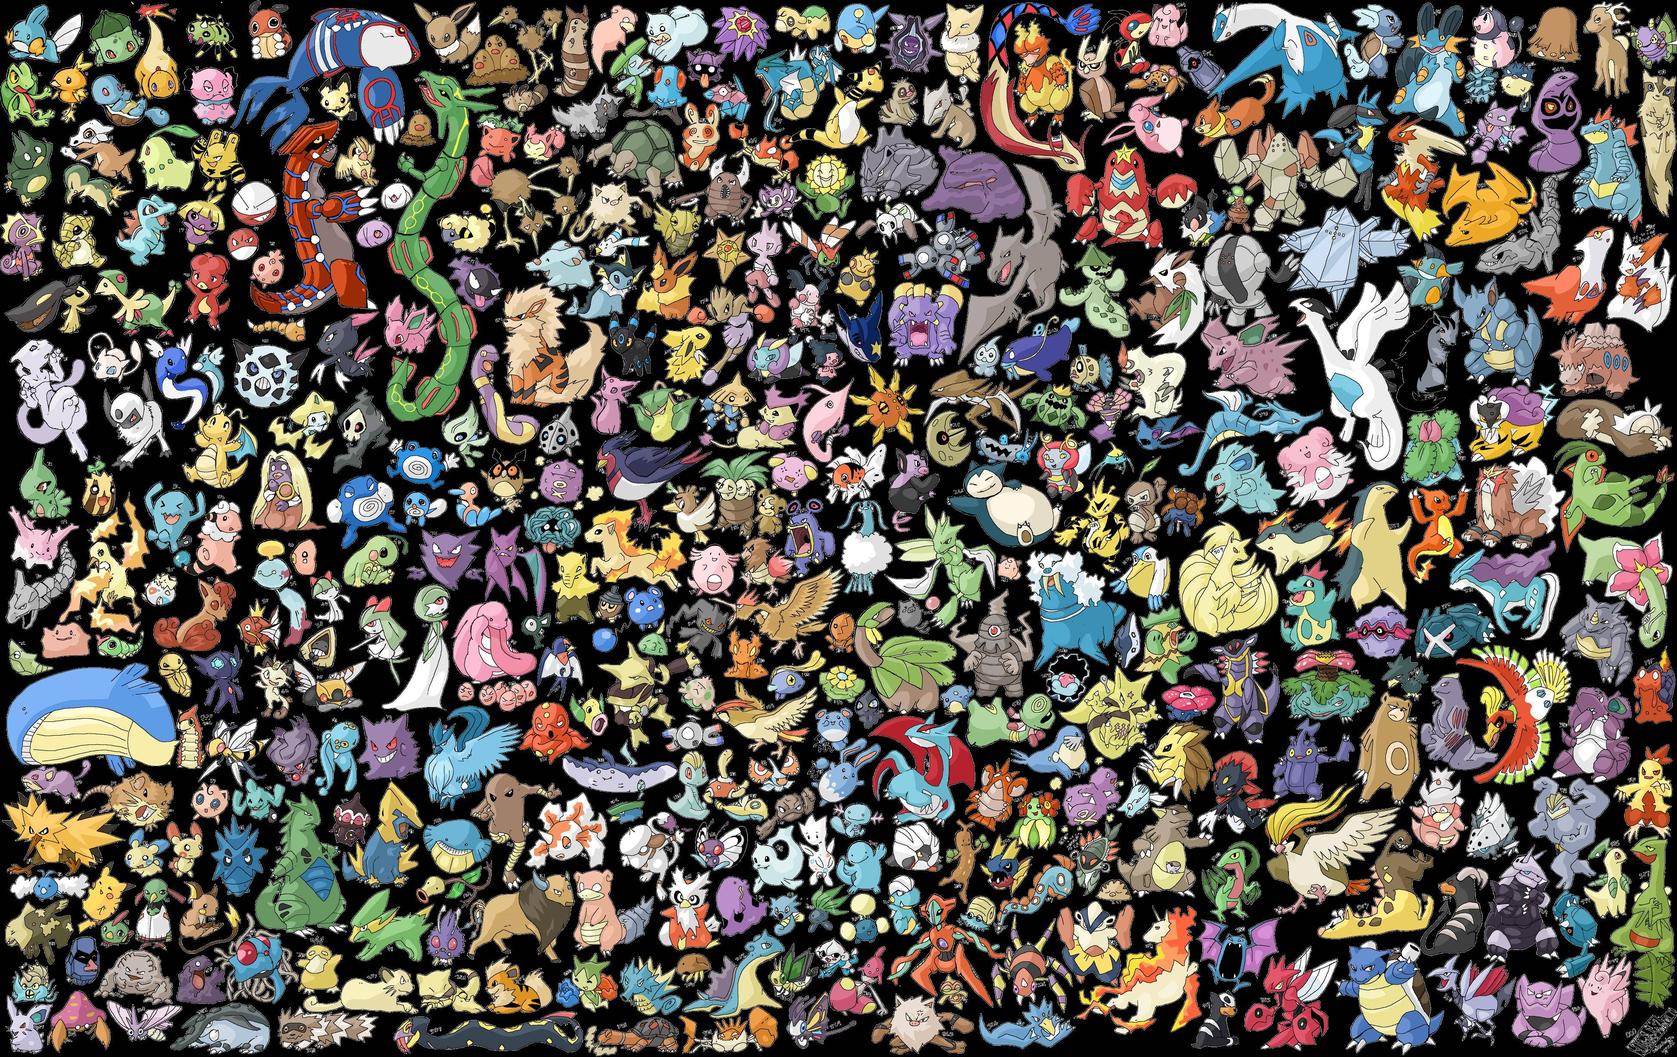 30 Pokemon Wallpapers Backgrounds Images Design Trends HD Wallpapers Download Free Map Images Wallpaper [wallpaper376.blogspot.com]